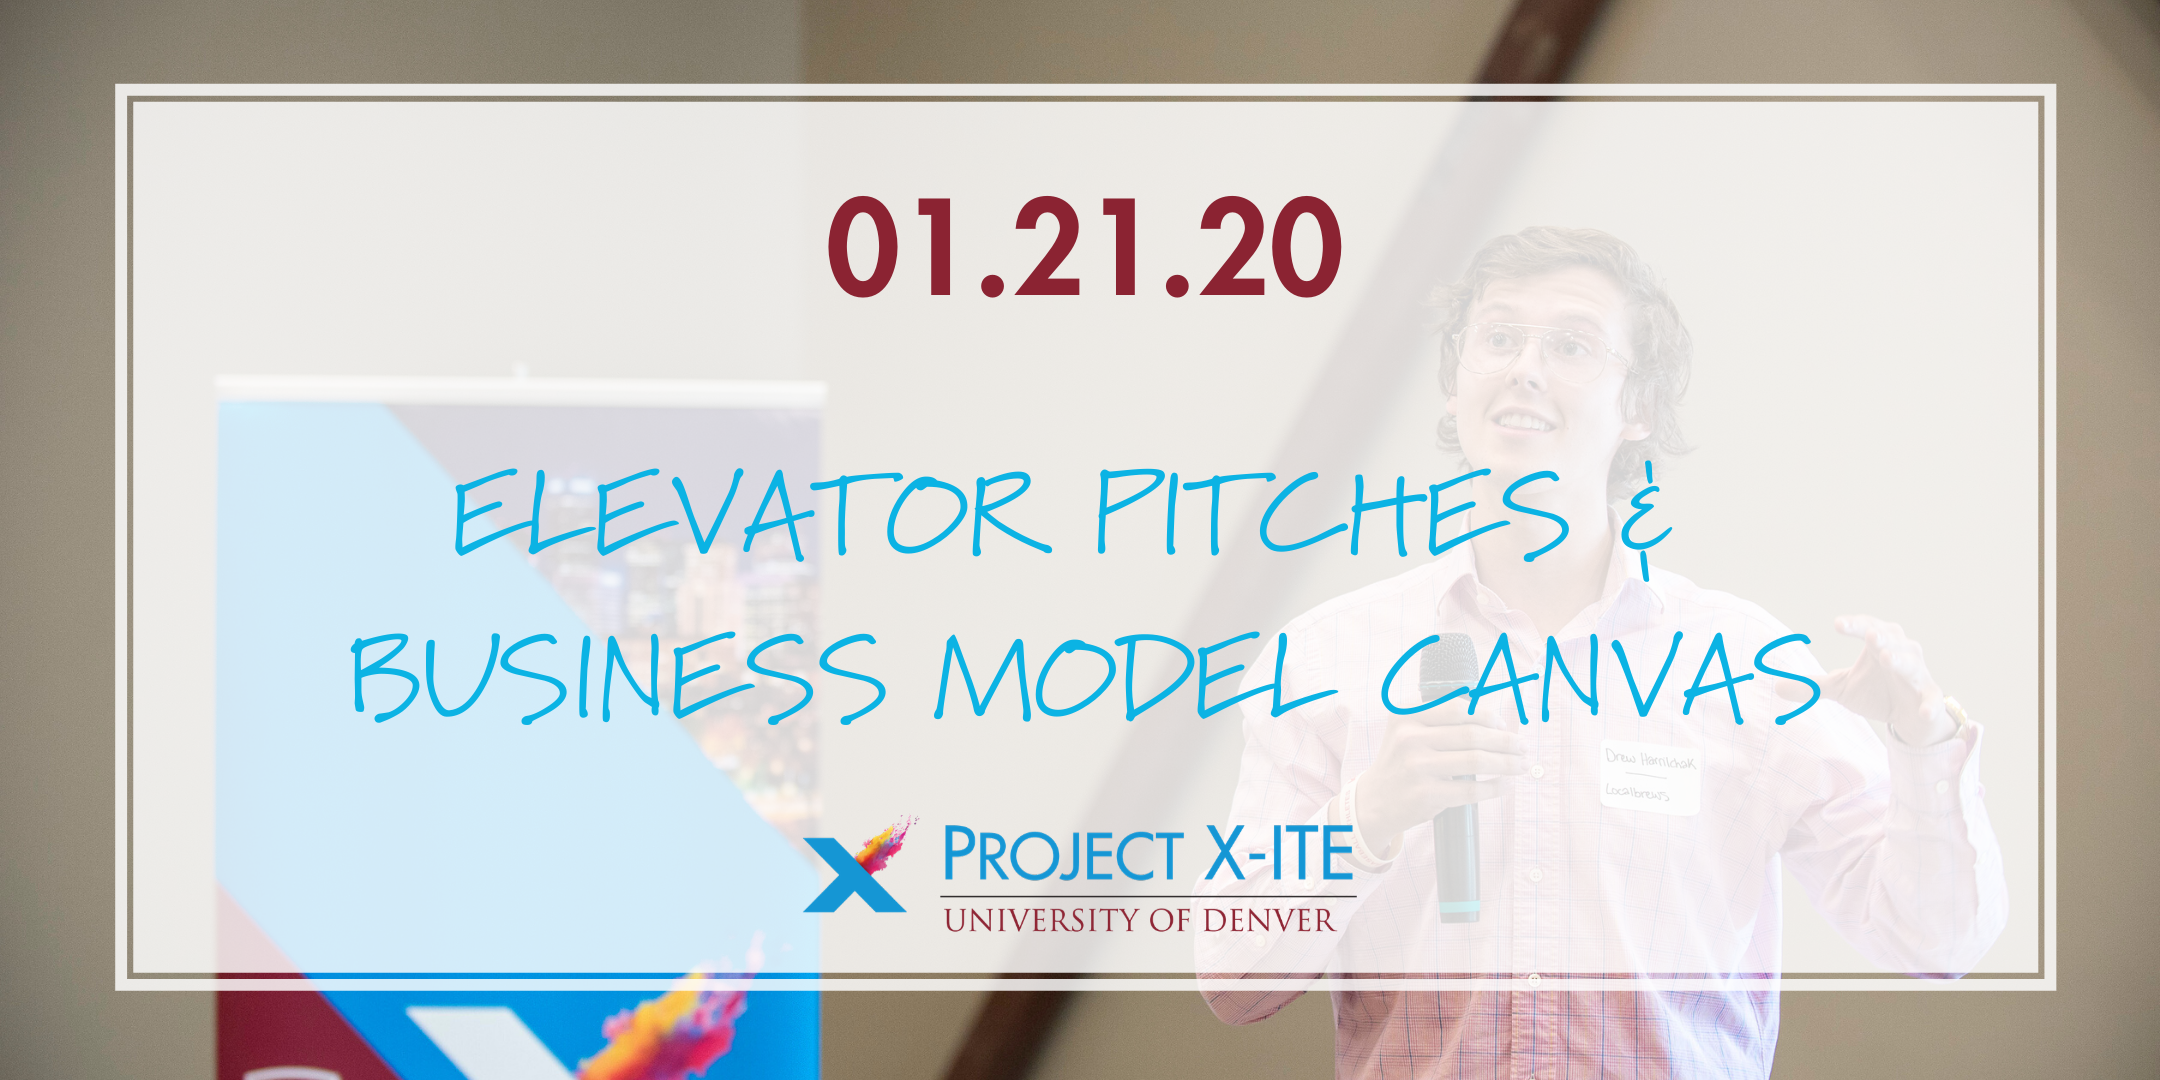 X-ITE WORKSHOP: Elevator Pitches & Business Model Canvas